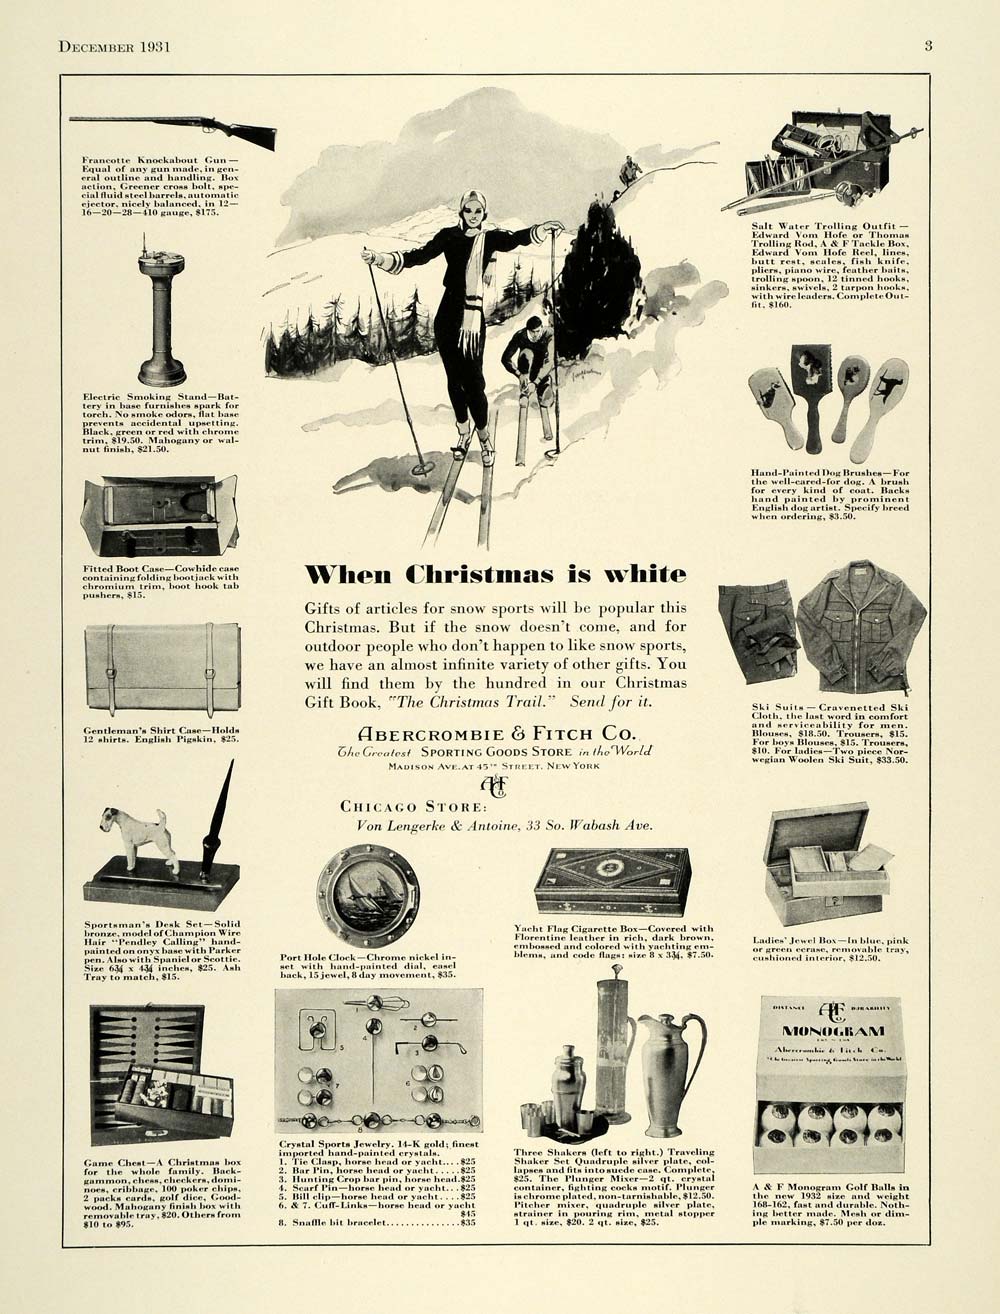 1931 Ad Abercrombie Fitch Christmas Sports Goods Skiing - ORIGINAL SPM1